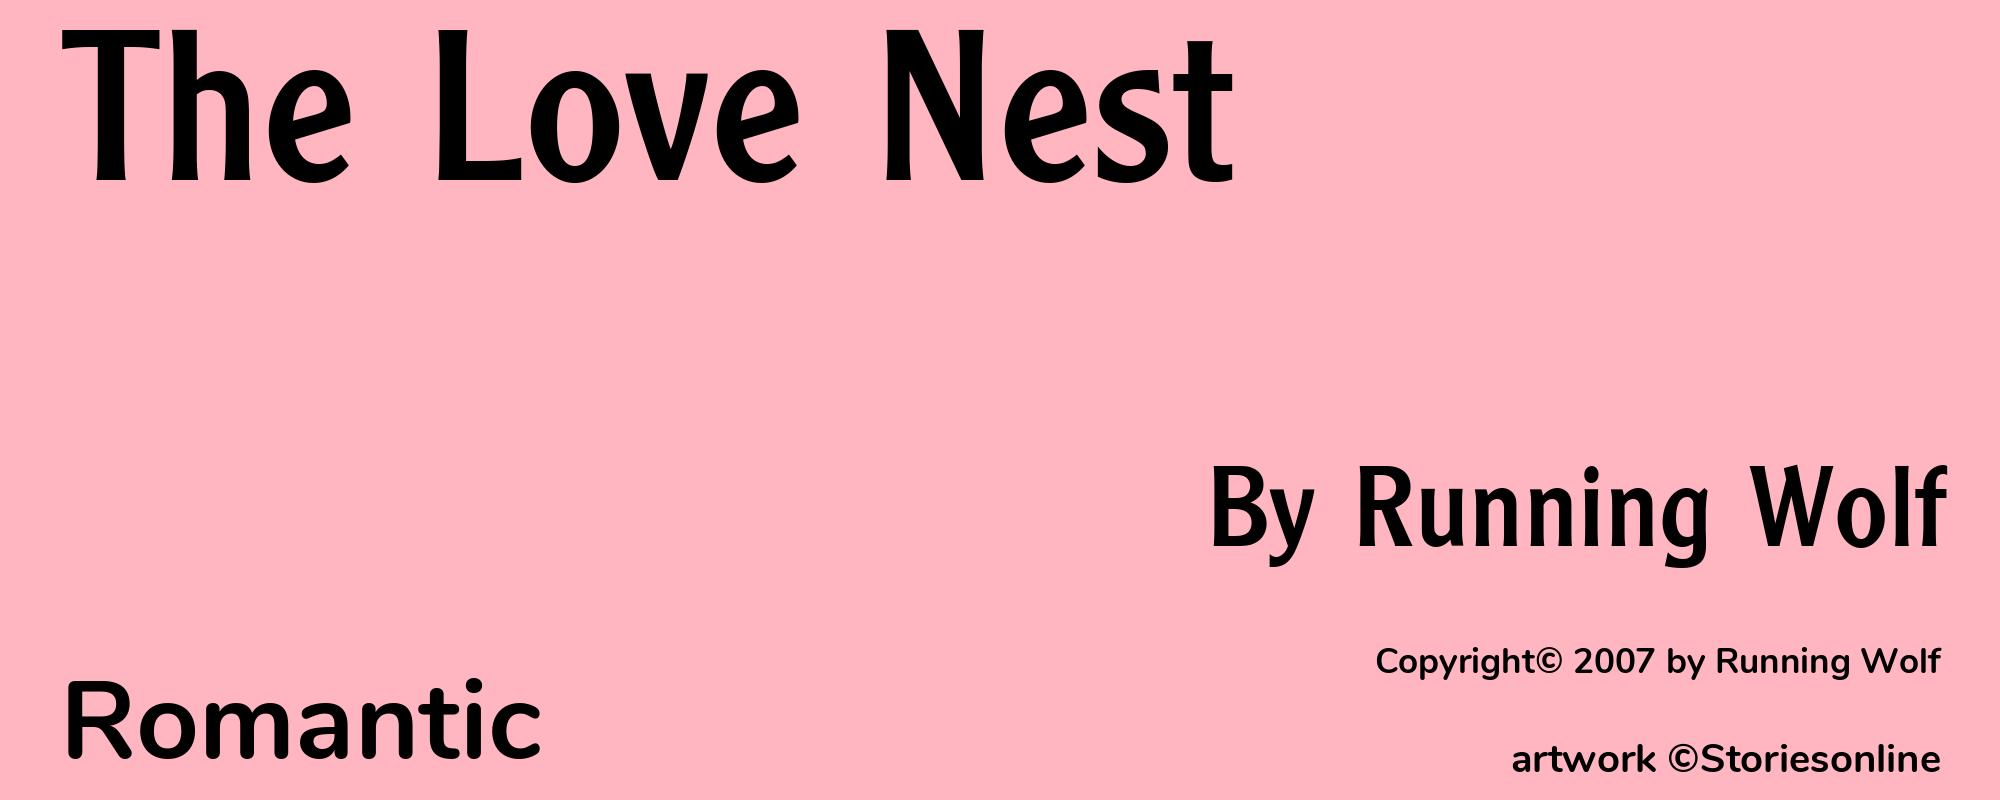 The Love Nest - Cover